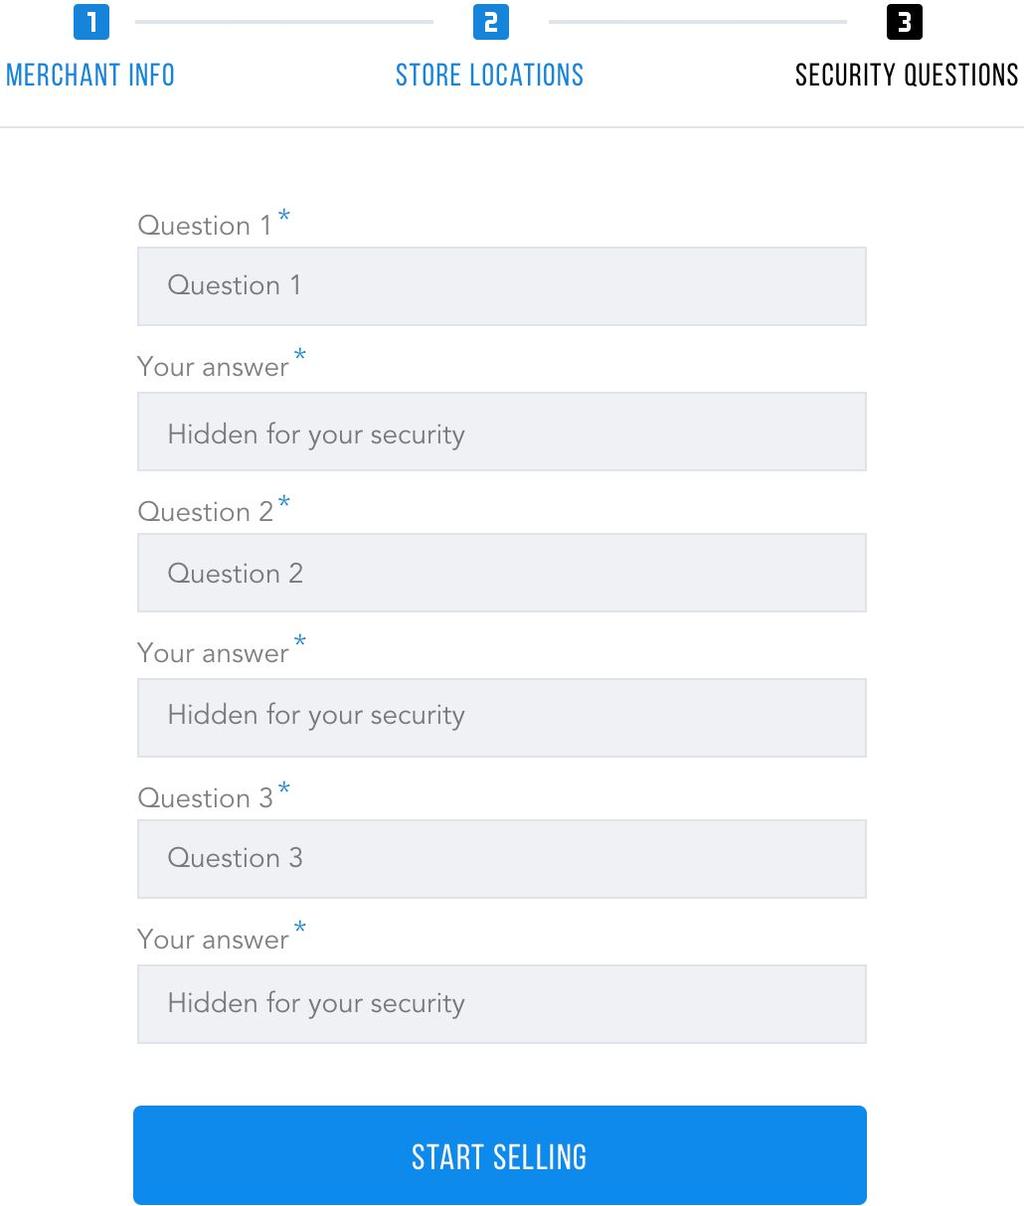 Figure 6: Viewing security questions You cannot change the questions or answers and the fields are read-only. Besides, the answers are hidden for security reasons.